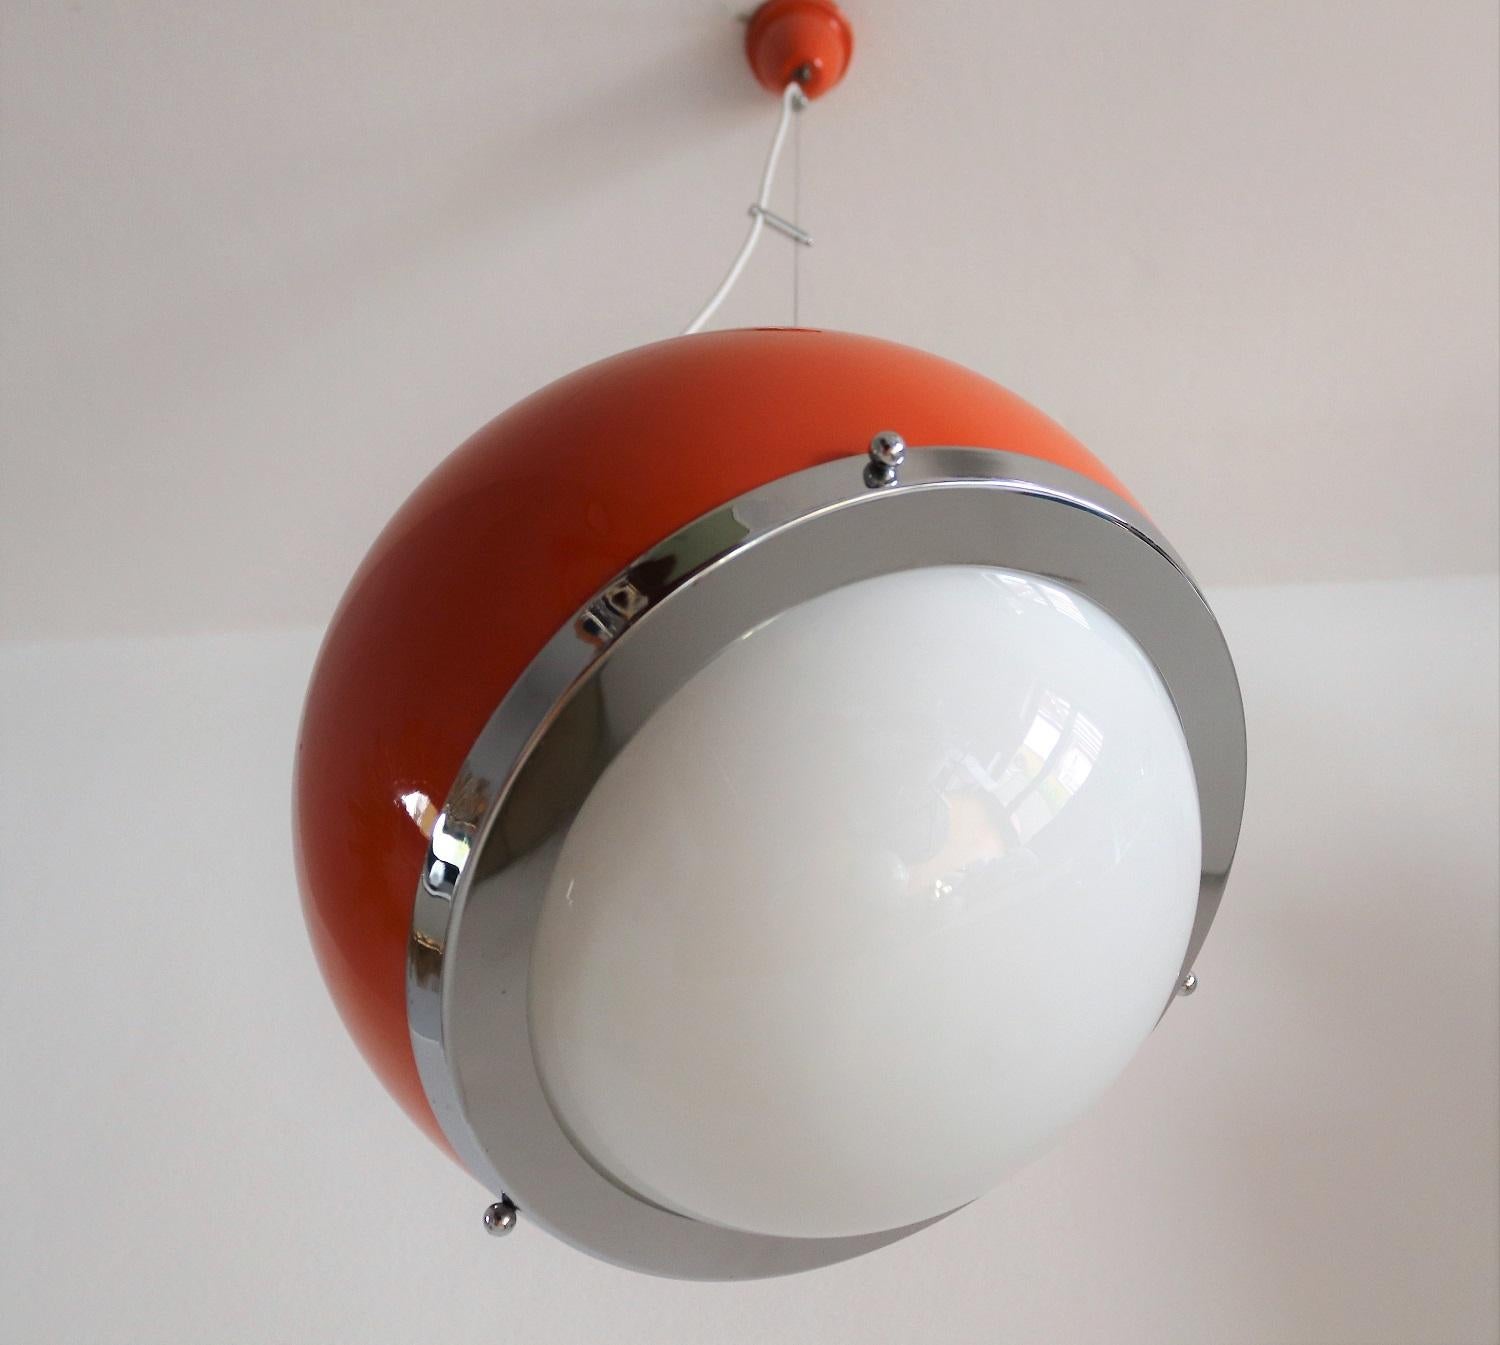 Very particular pendant lamp from the Space Age with aluminium base in shiny orange and curved opaline glass plate.
Made in Italy during the 1960s.
It is a special feature of the lamp that it is possible to adjust the inclination of it by changing